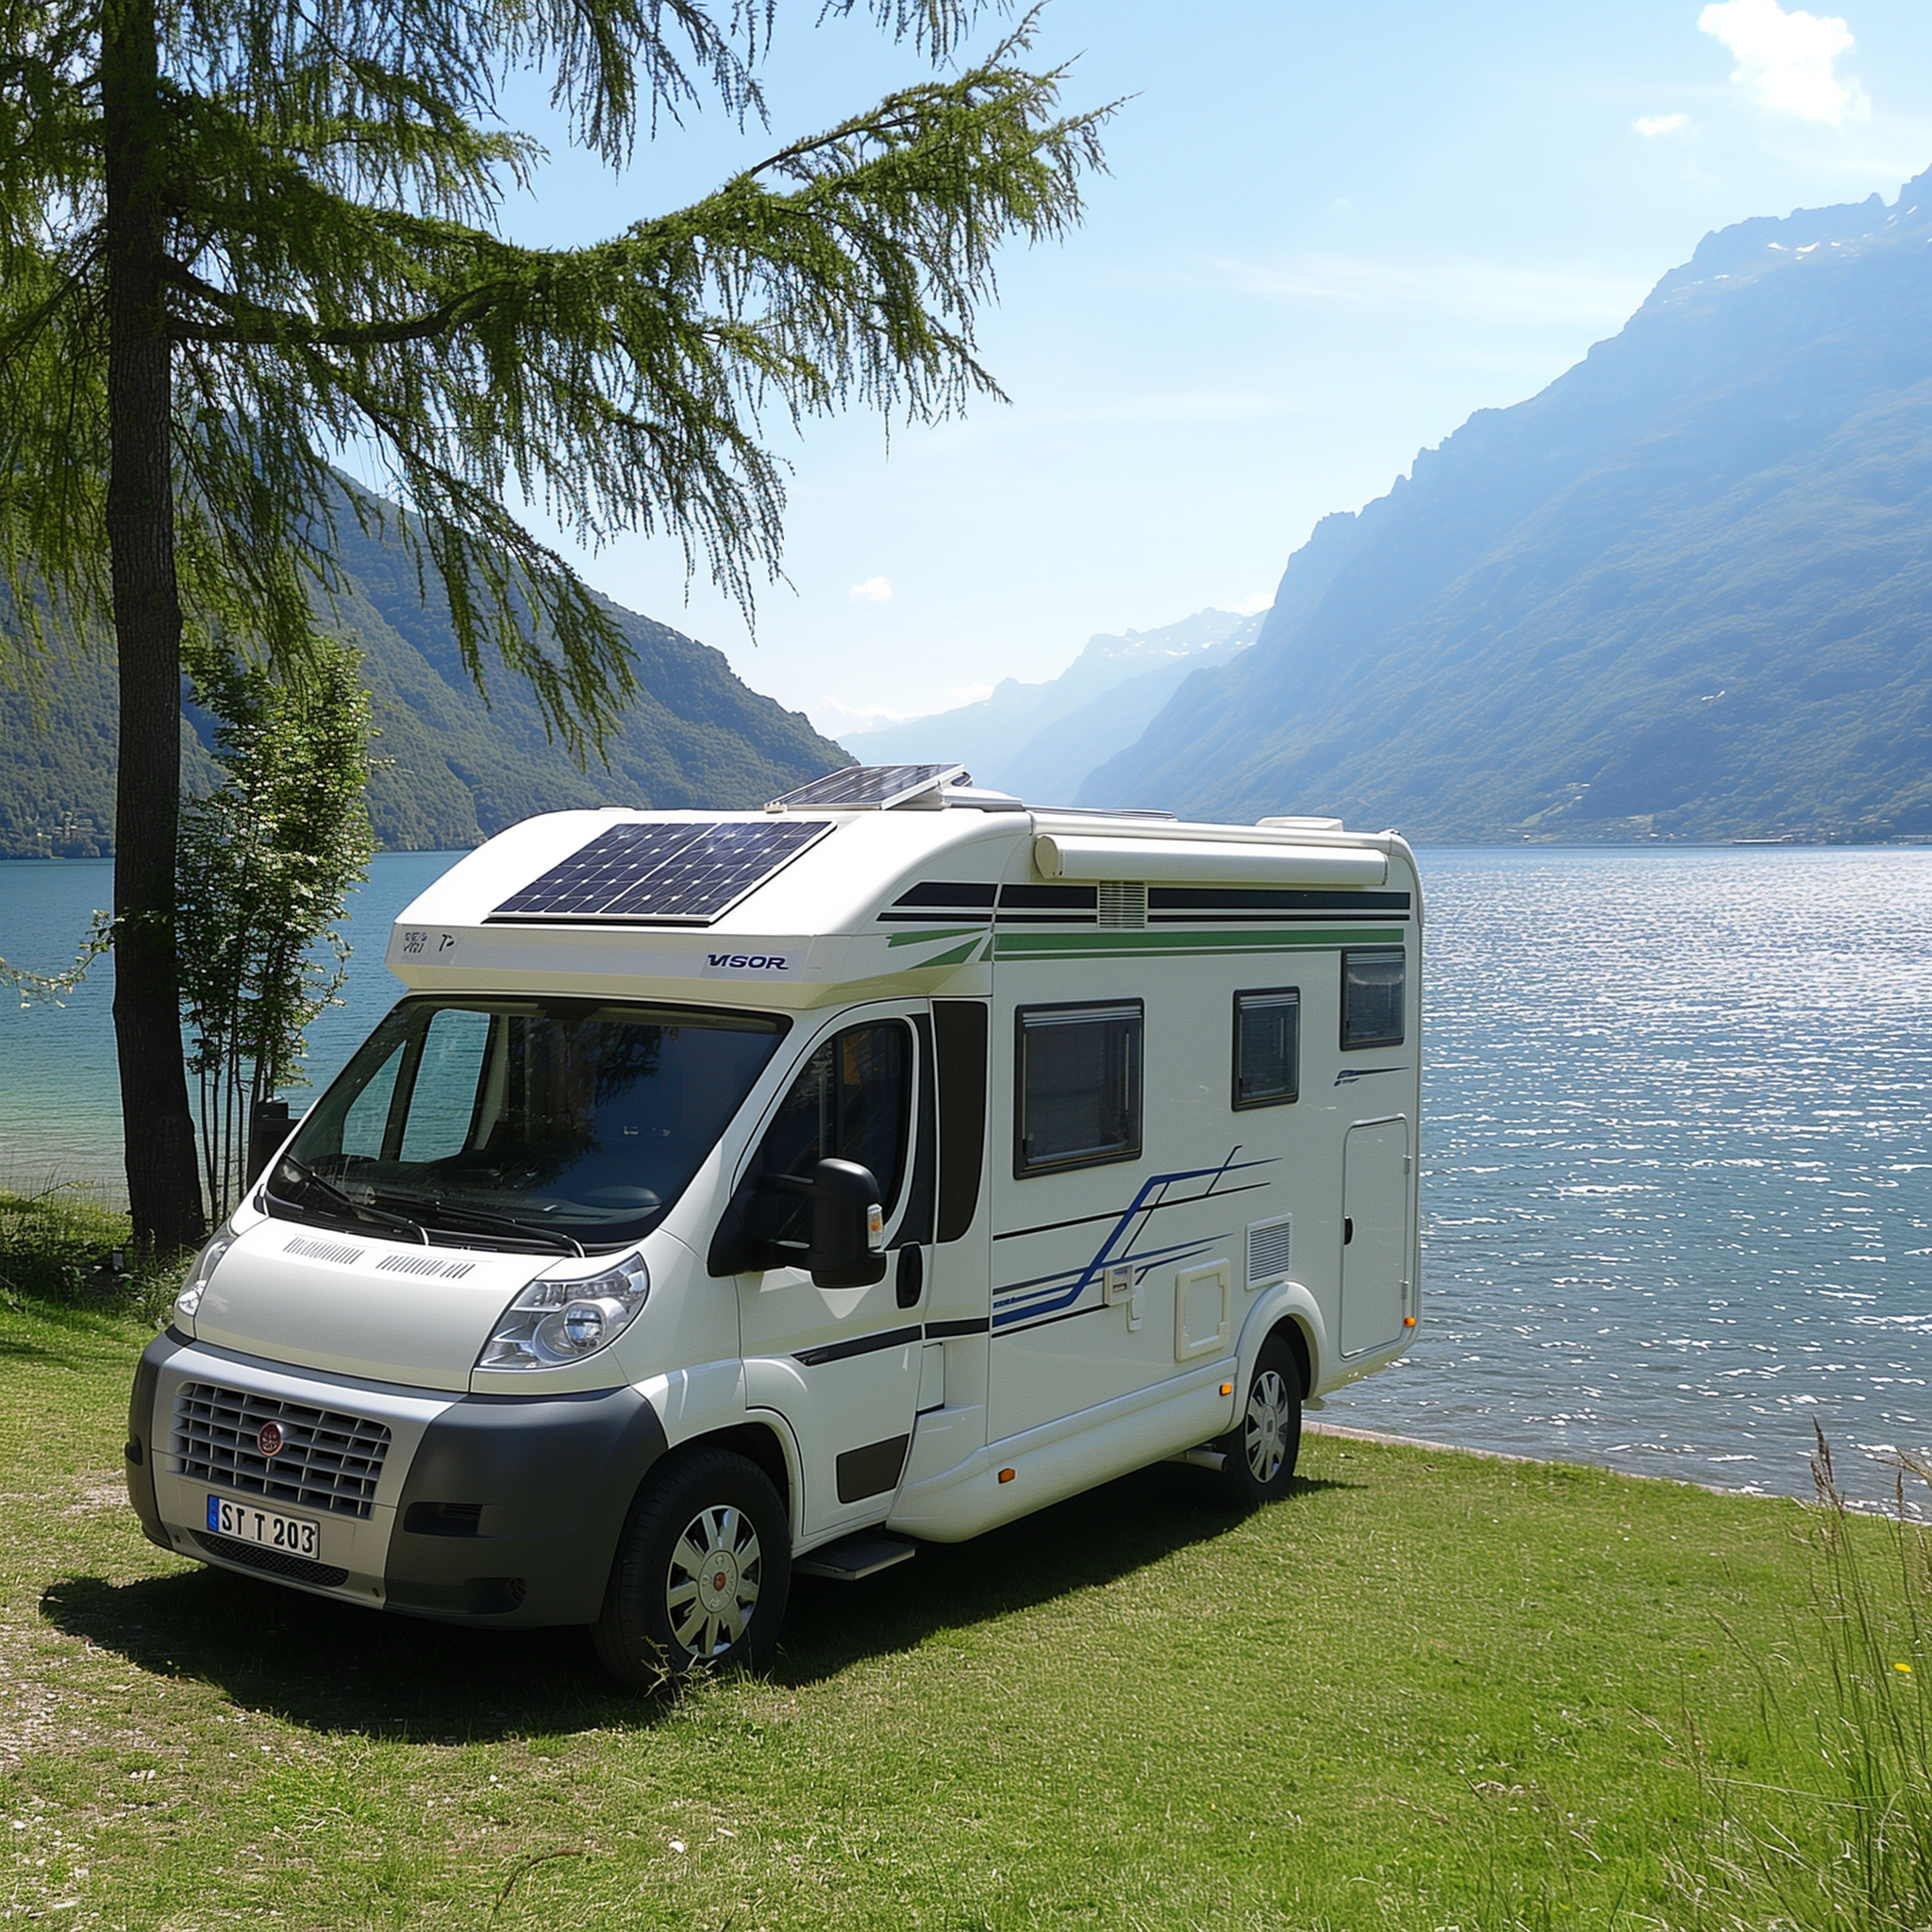 A white campervan with solar panels on the roof, parked on a grassy area next to a lake.